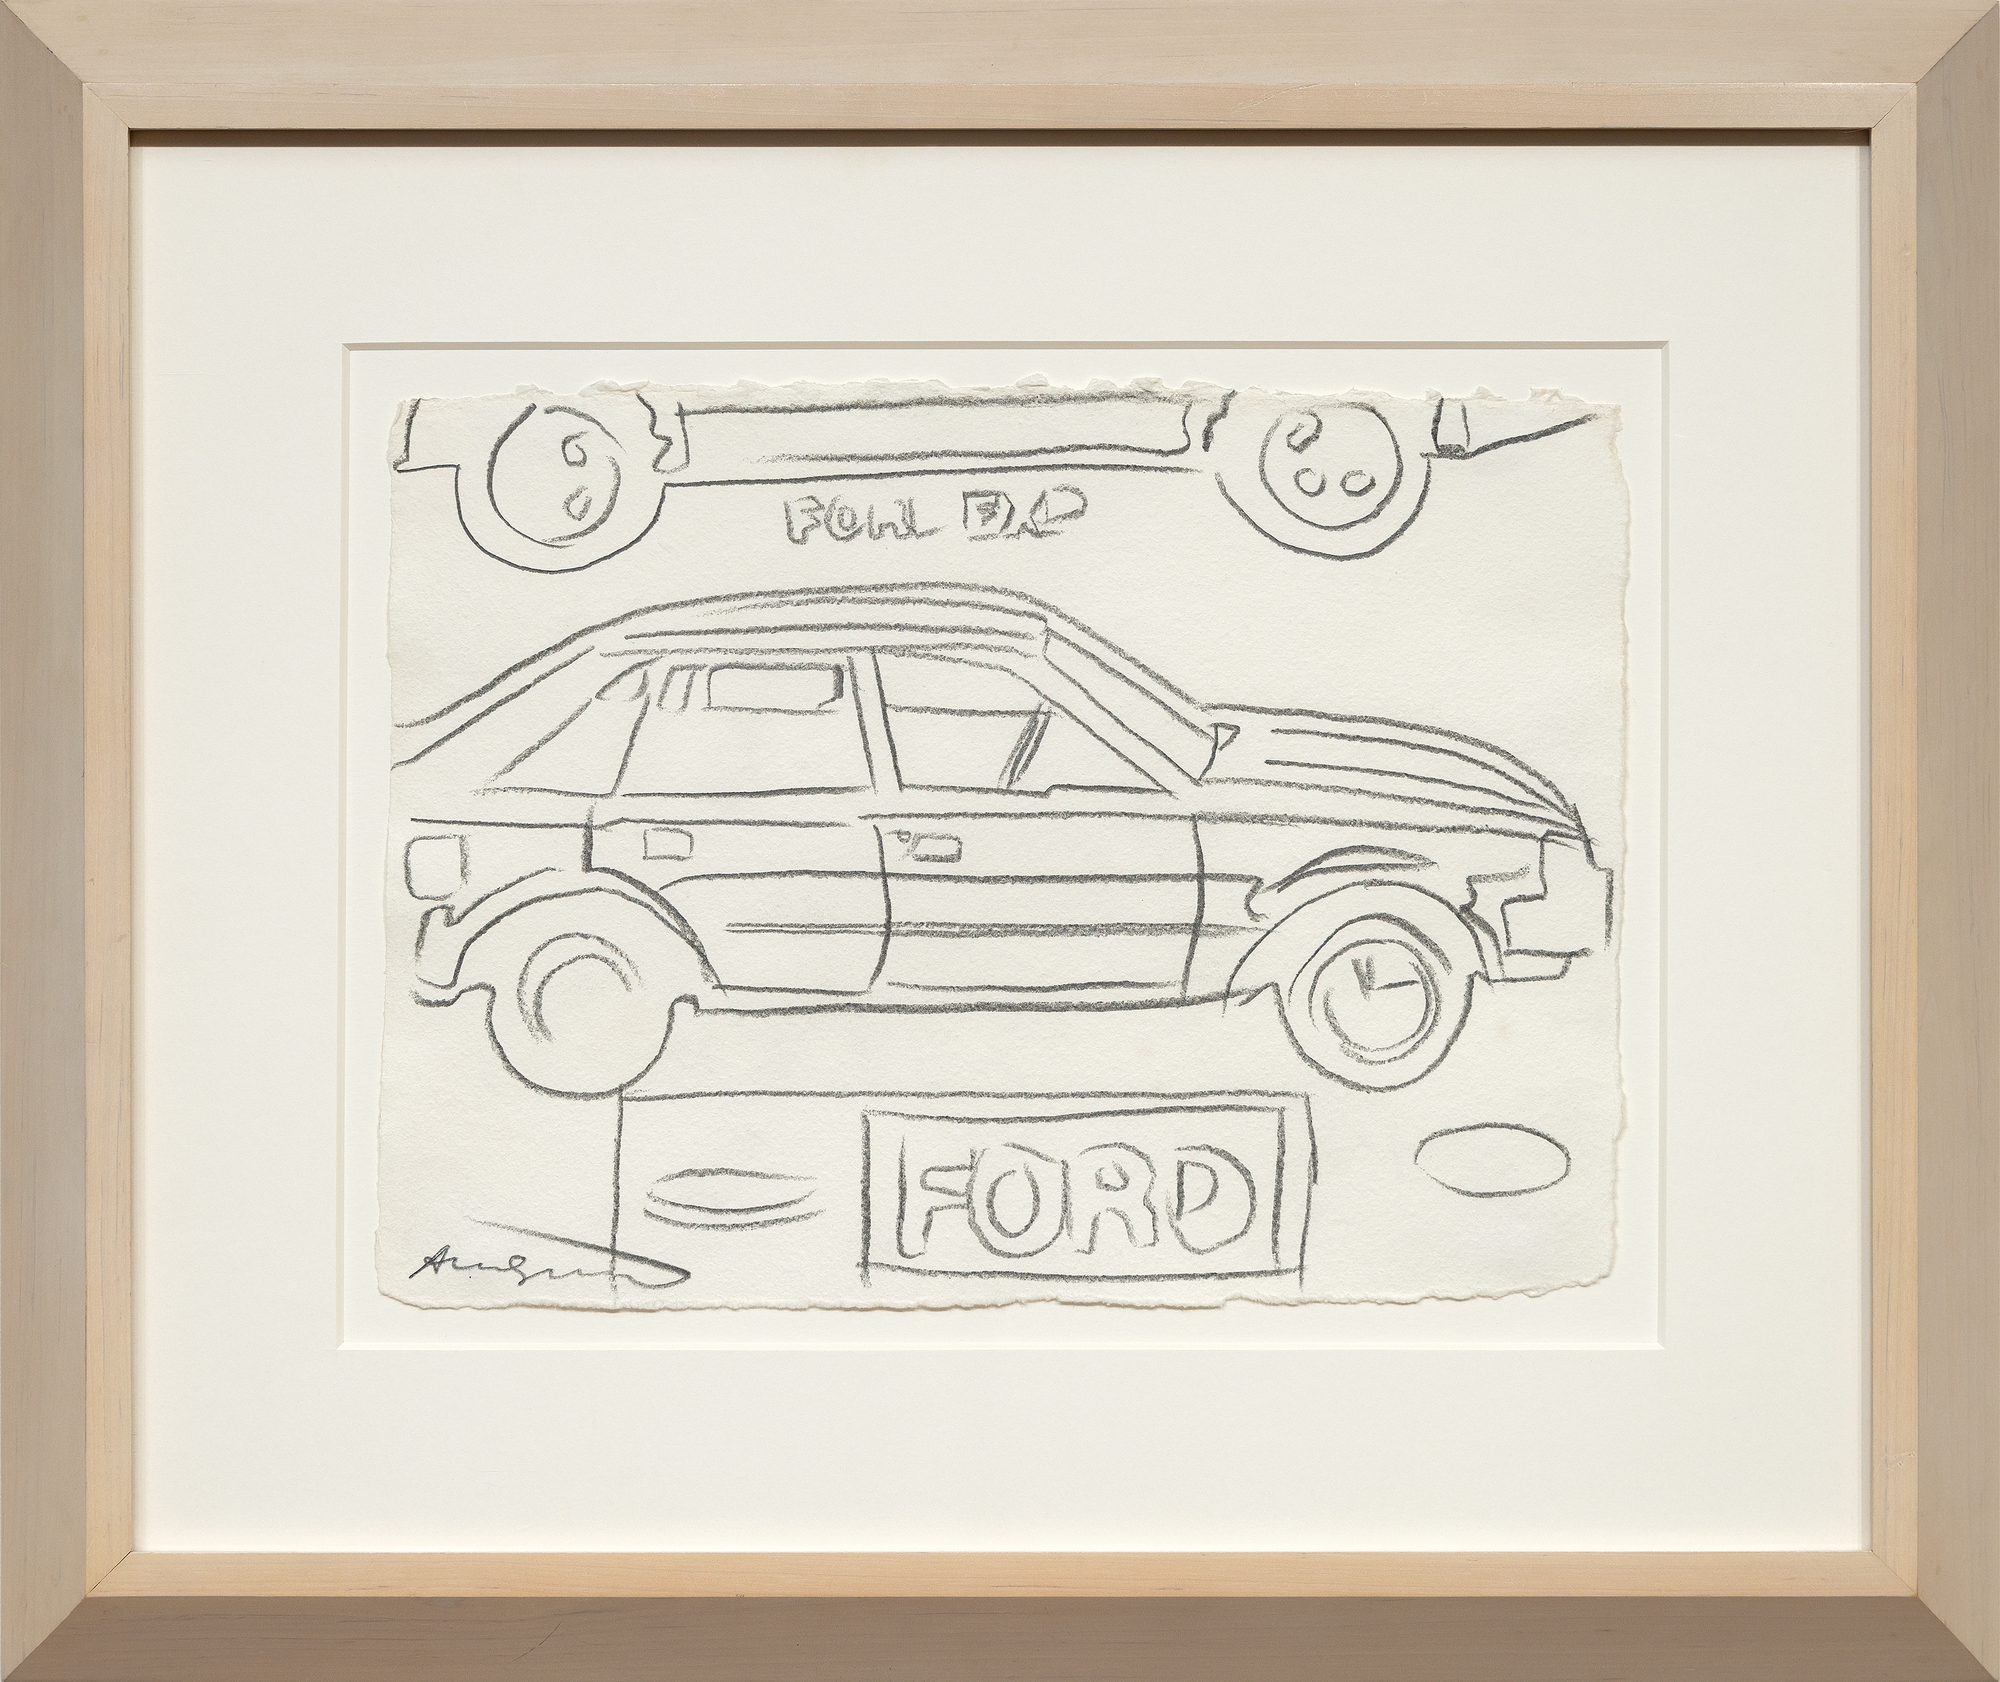 ANDY WARHOL - Ford car - graphite on paper - 11 1/2  x 15 3/4 in.